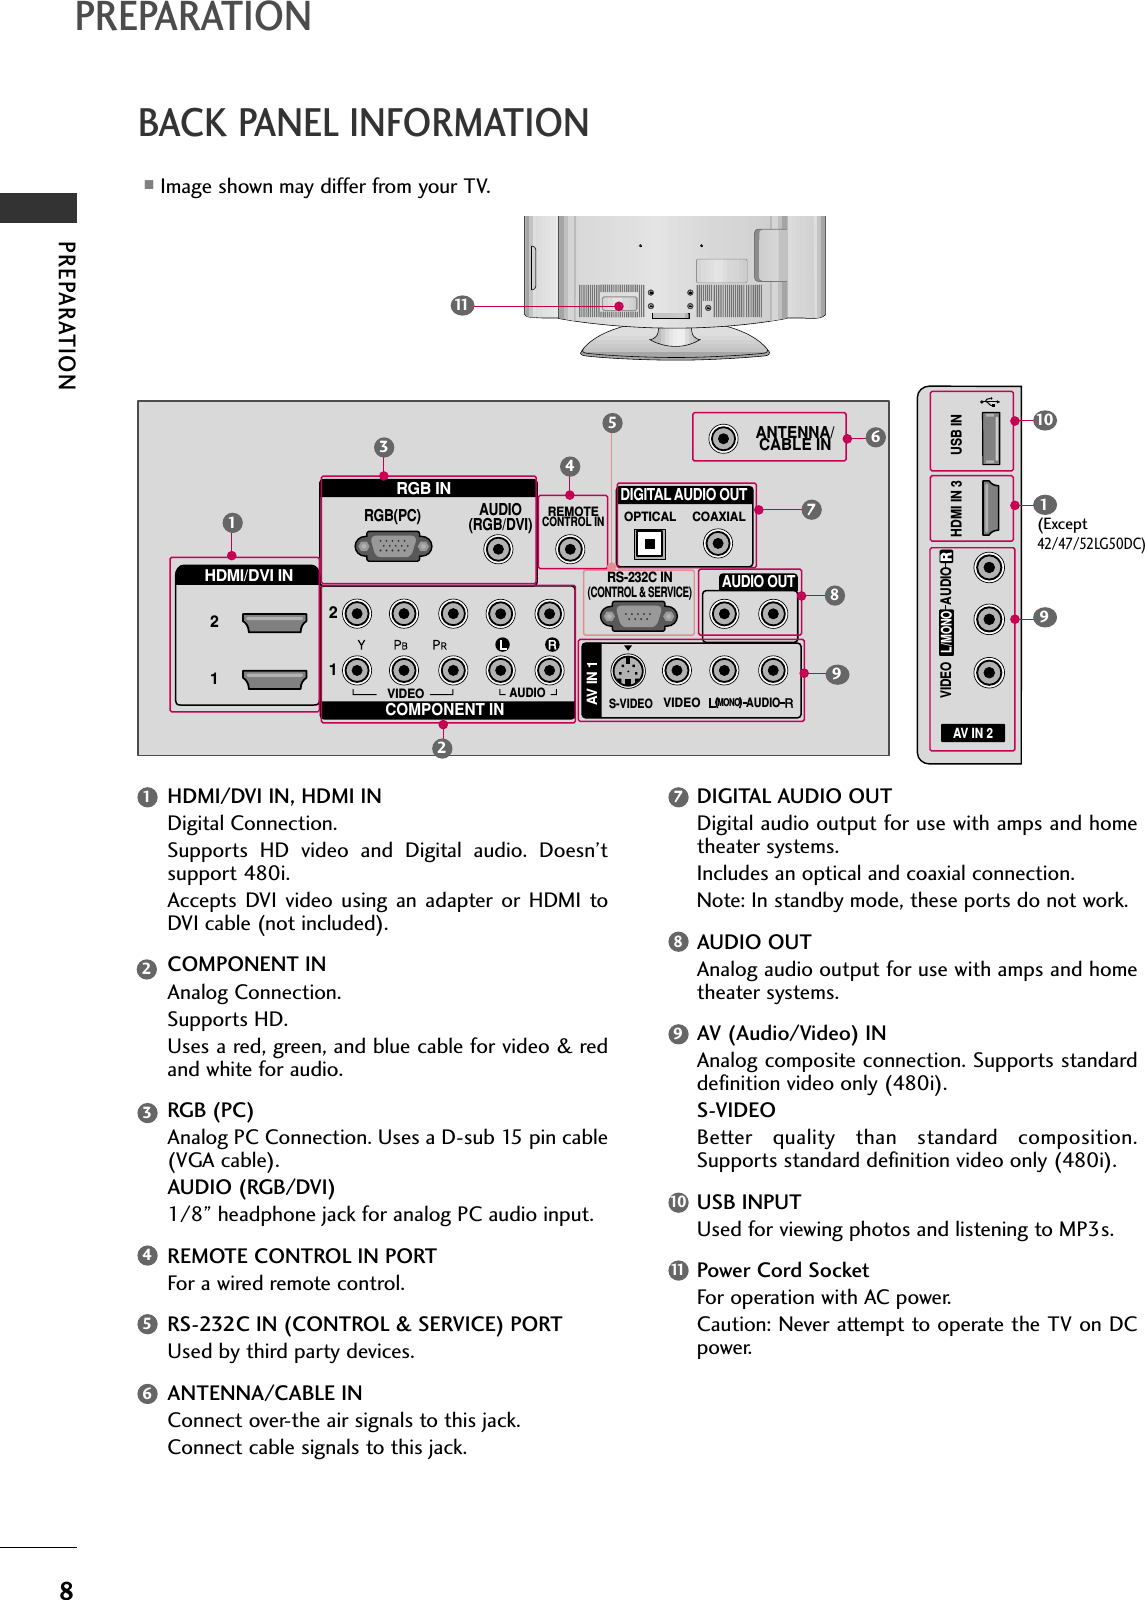 PREPARATION8BACK PANEL INFORMATIONPREPARATION■Image shown may differ from your TV.AV IN 2L/MONORAUDIOVIDEOHDMI IN 3 USB IN(            )RGB INCOMPONENT INAUDIO(RGB/DVI)RGB(PC)REMOTECONTROL INANTENNA/CABLE IN12RS-232C IN(CONTROL &amp; SERVICE)VIDEOAUDIOOPTICAL COAXIALDIGITAL AUDIO OUTAUDIO OUTAV IN 1RHDMI/DVI IN 21VIDEOMONO(            )AUDIOS-VIDEO1346782995101R(            )11HDMI/DVI IN, HDMI INDigital Connection. Supports  HD  video  and  Digital  audio.  Doesn’tsupport 480i. Accepts  DVI  video  using  an  adapter  or  HDMI  toDVI cable (not included).COMPONENT INAnalog Connection. Supports HD. Uses a red, green, and blue cable for video &amp; redand white for audio.RGB (PC)Analog PC Connection. Uses a D-sub 15 pin cable(VGA cable).AUDIO (RGB/DVI)1/8” headphone jack for analog PC audio input.REMOTE CONTROL IN PORTFor a wired remote control.RS-232C IN (CONTROL &amp; SERVICE) PORTUsed by third party devices.ANTENNA/CABLE INConnect over-the air signals to this jack.Connect cable signals to this jack.DIGITAL AUDIO OUTDigital audio output for use with amps and hometheater systems. Includes an optical and coaxial connection.Note: In standby mode, these ports do not work.AUDIO OUTAnalog audio output for use with amps and hometheater systems.AV (Audio/Video) INAnalog composite connection. Supports standarddefinition video only (480i).S-VIDEOBetter  quality  than  standard  composition.Supports standard definition video only (480i).USB INPUTUsed for viewing photos and listening to MP3s.Power Cord SocketFor operation with AC power. Caution: Never attempt to operate the TV on DCpower.1234569101178(Except42/47/52LG50DC)